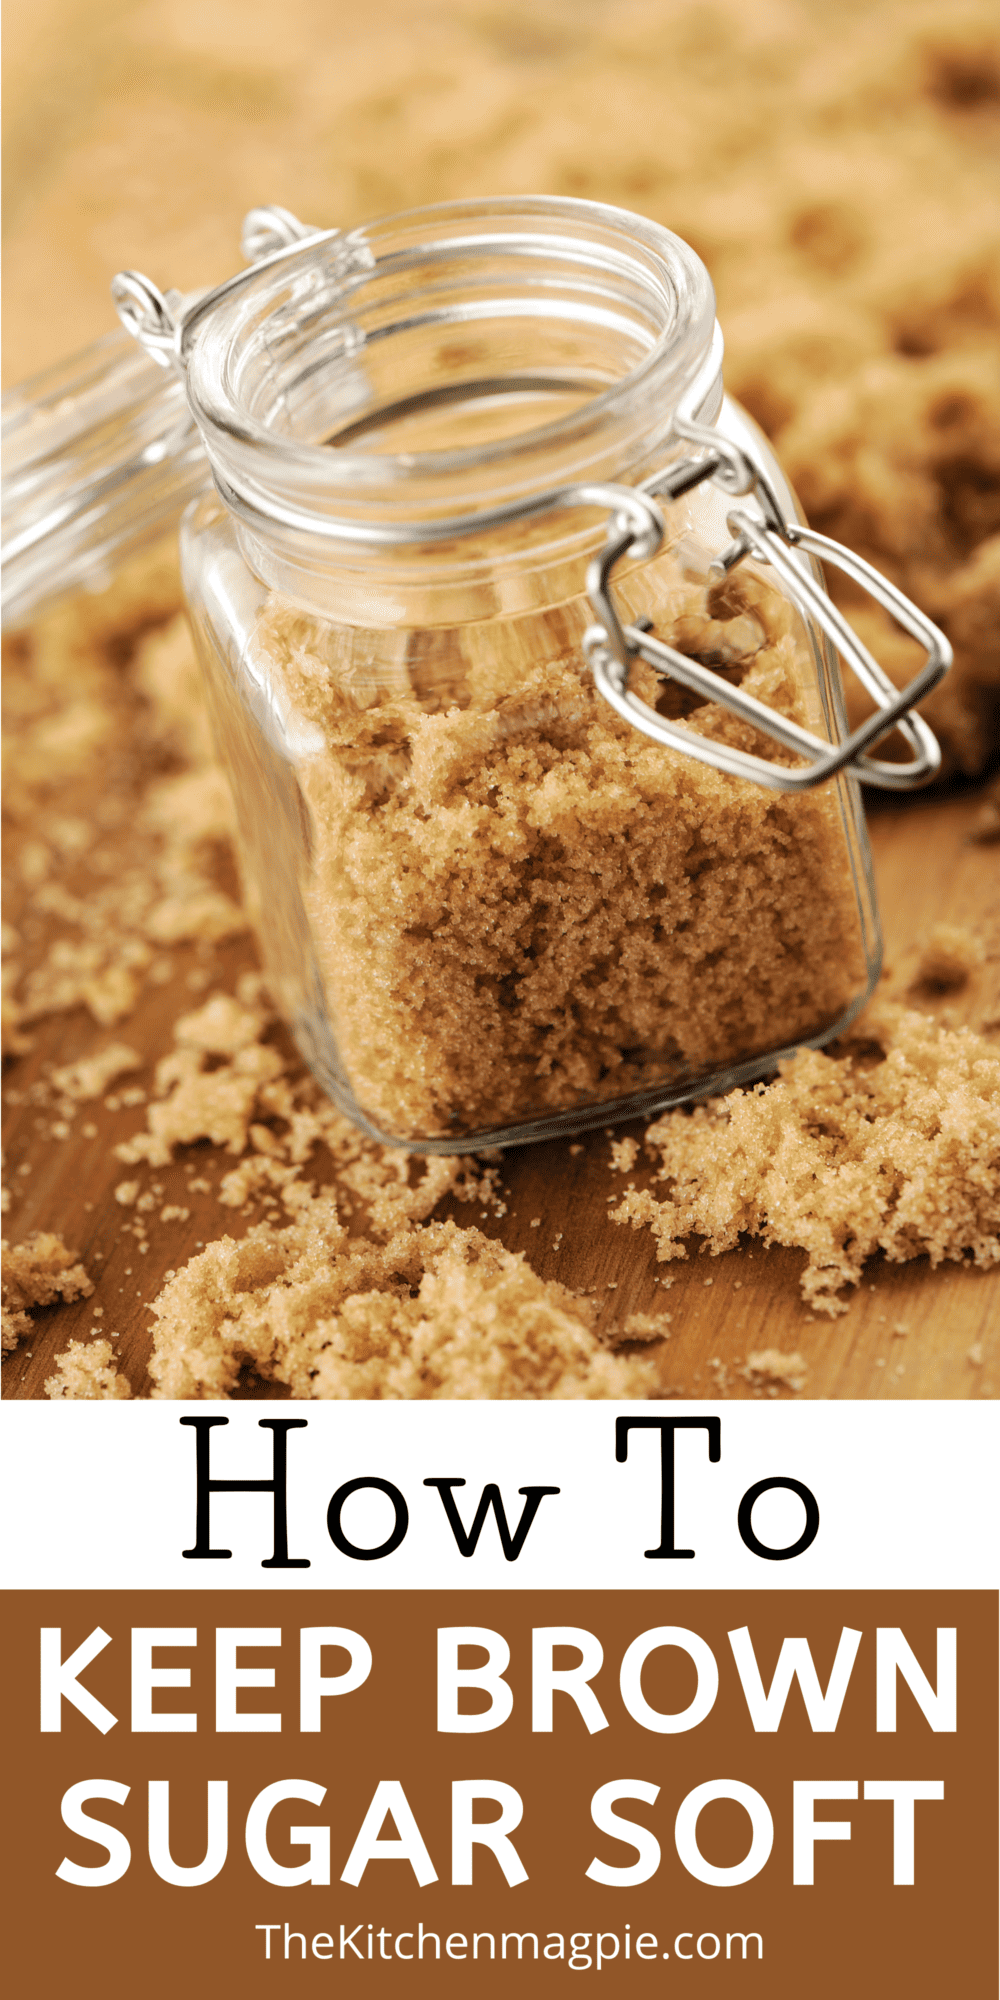 Easy tips and tricks on how to keep brown sugar soft and supple for baking and cooking your favorite recipes!